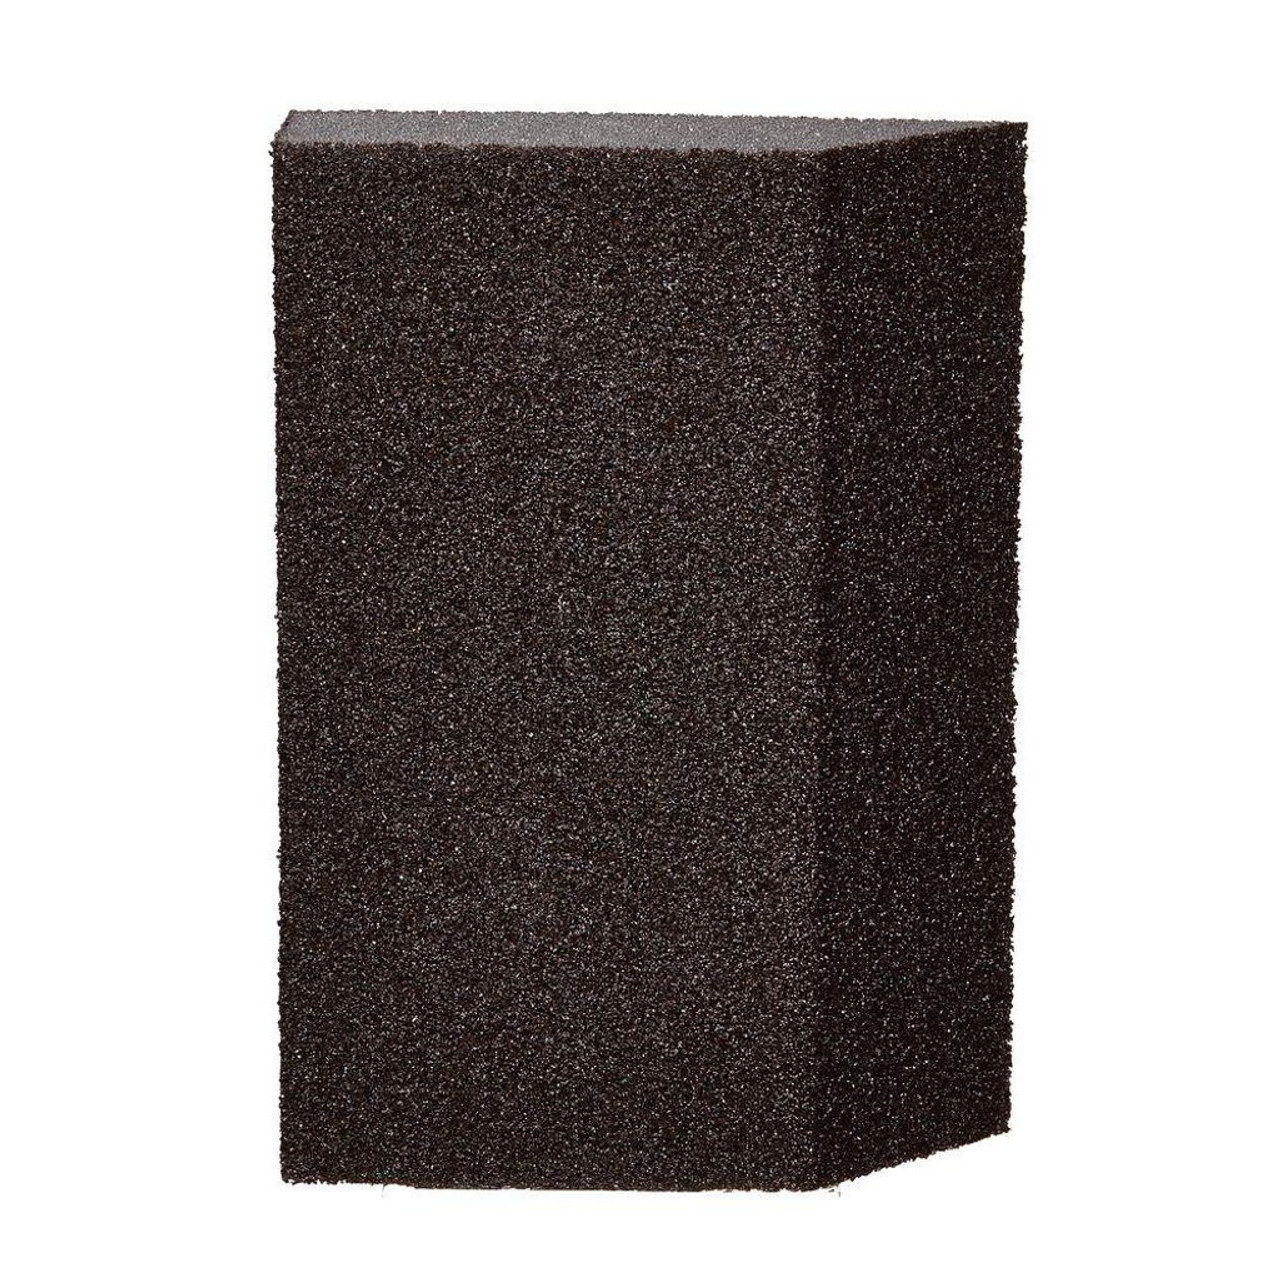 3M 2 7/8 in. x 8 in. x 1 in. Fine Extra Large Angled Drywall Sanding Sponge